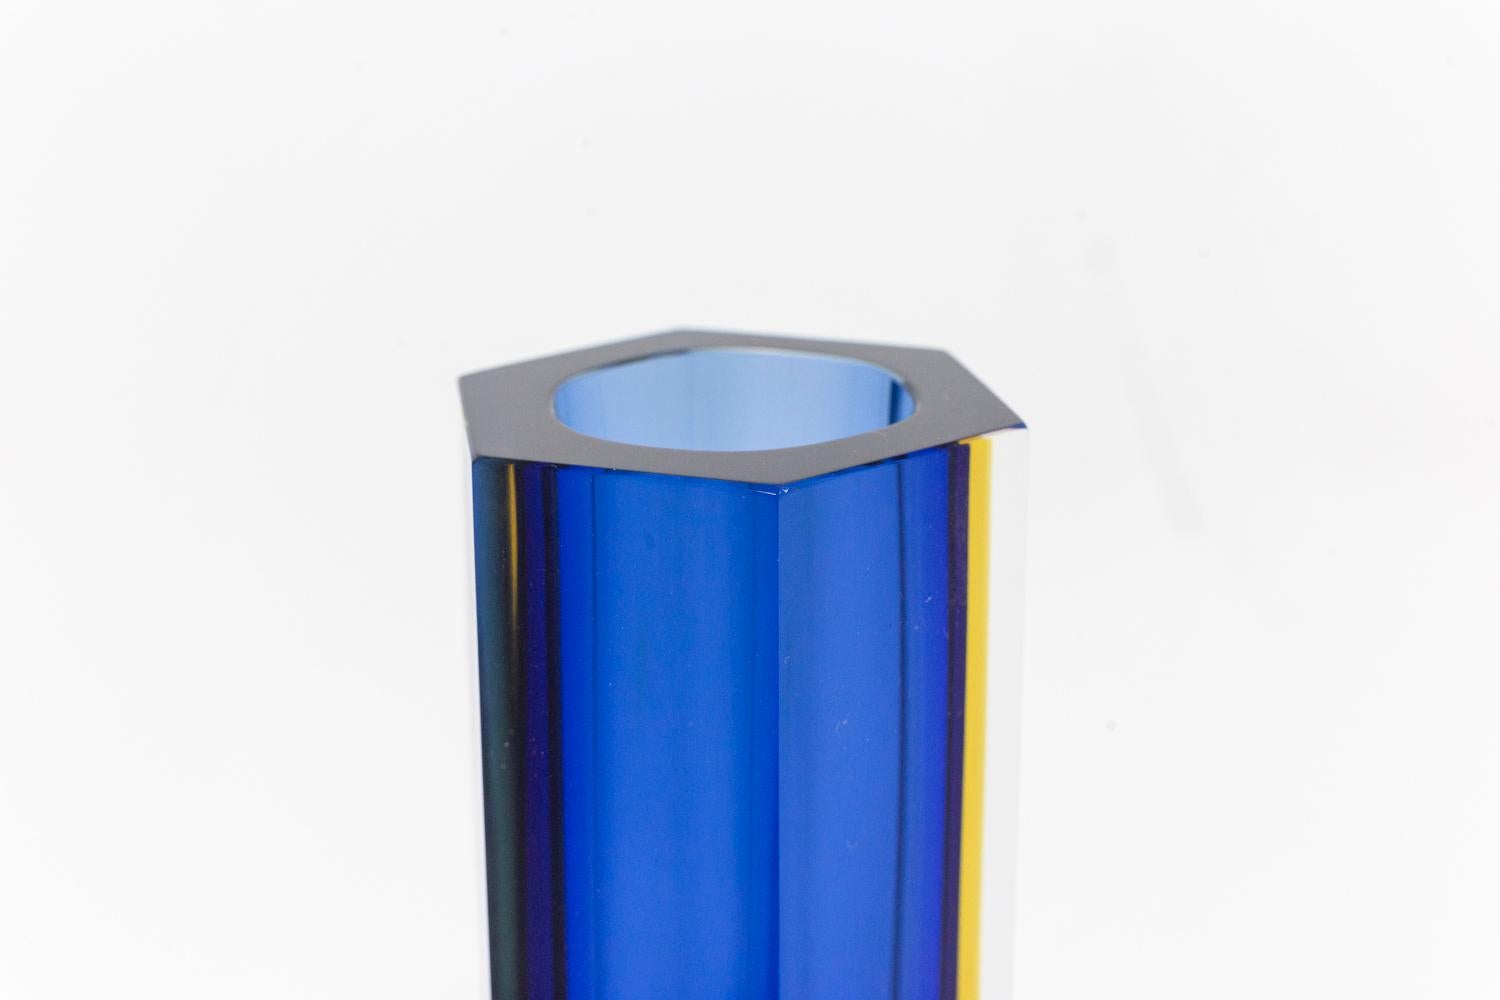 Flavio Poli, attributed to.
Luigi Mandruzzato, edited by. 

Murano vase of conical shape with geometric facets, blue and yellow color.

Italian work realized in the 1950s. 
 